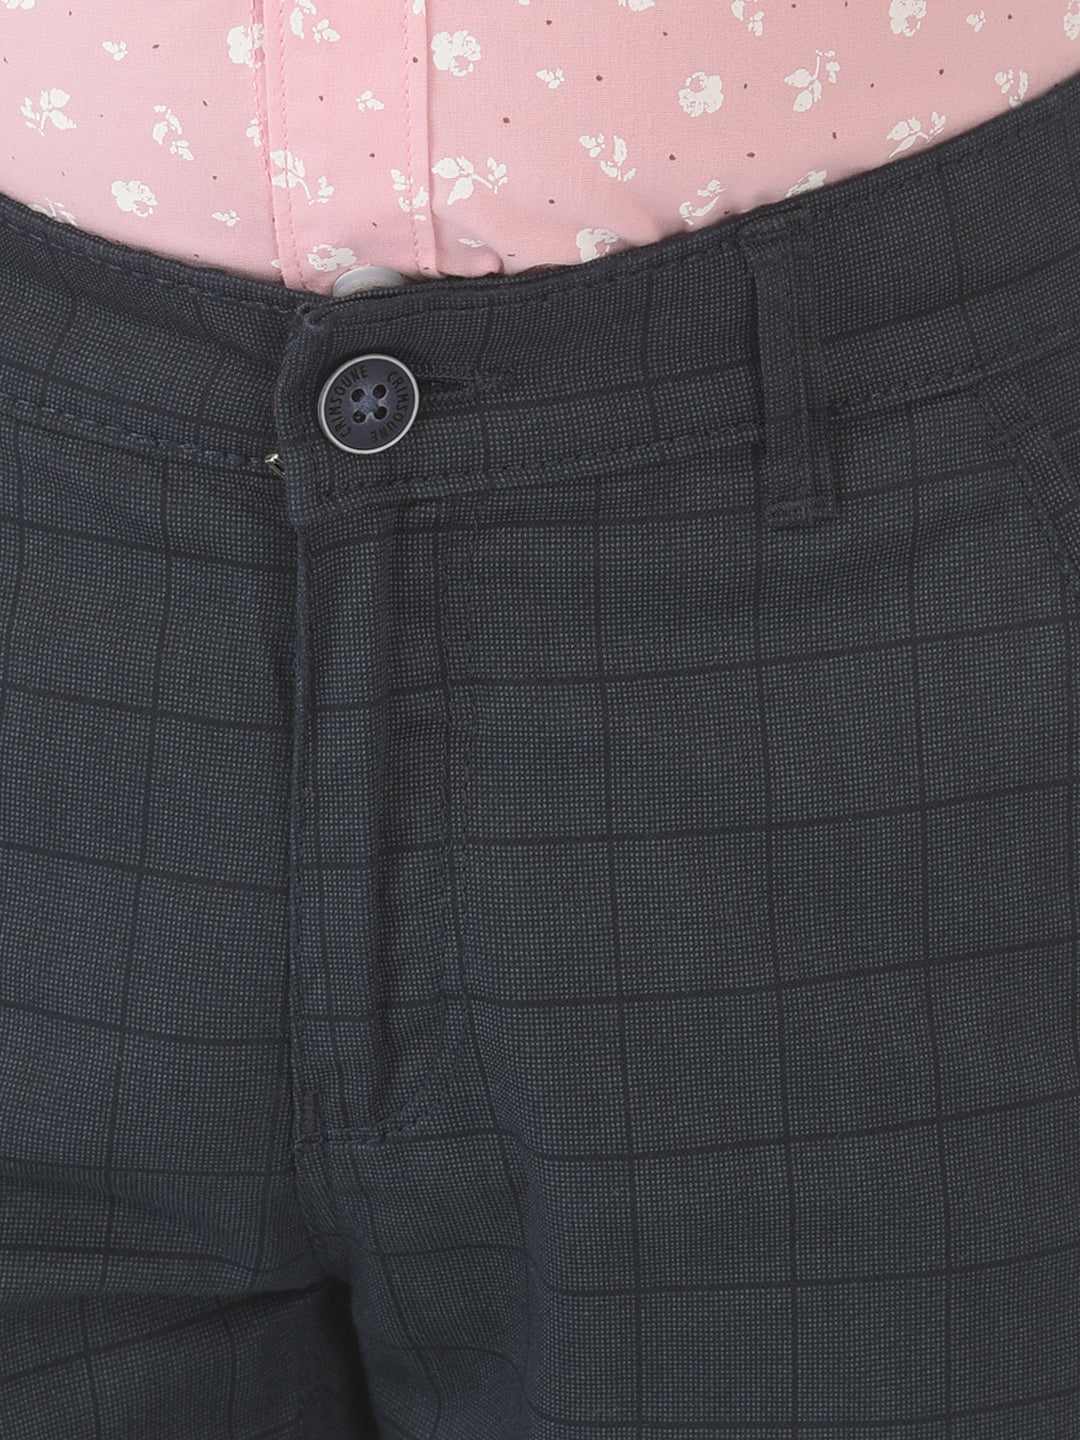 Navy Blue Checked Trousers - Boys Trousers